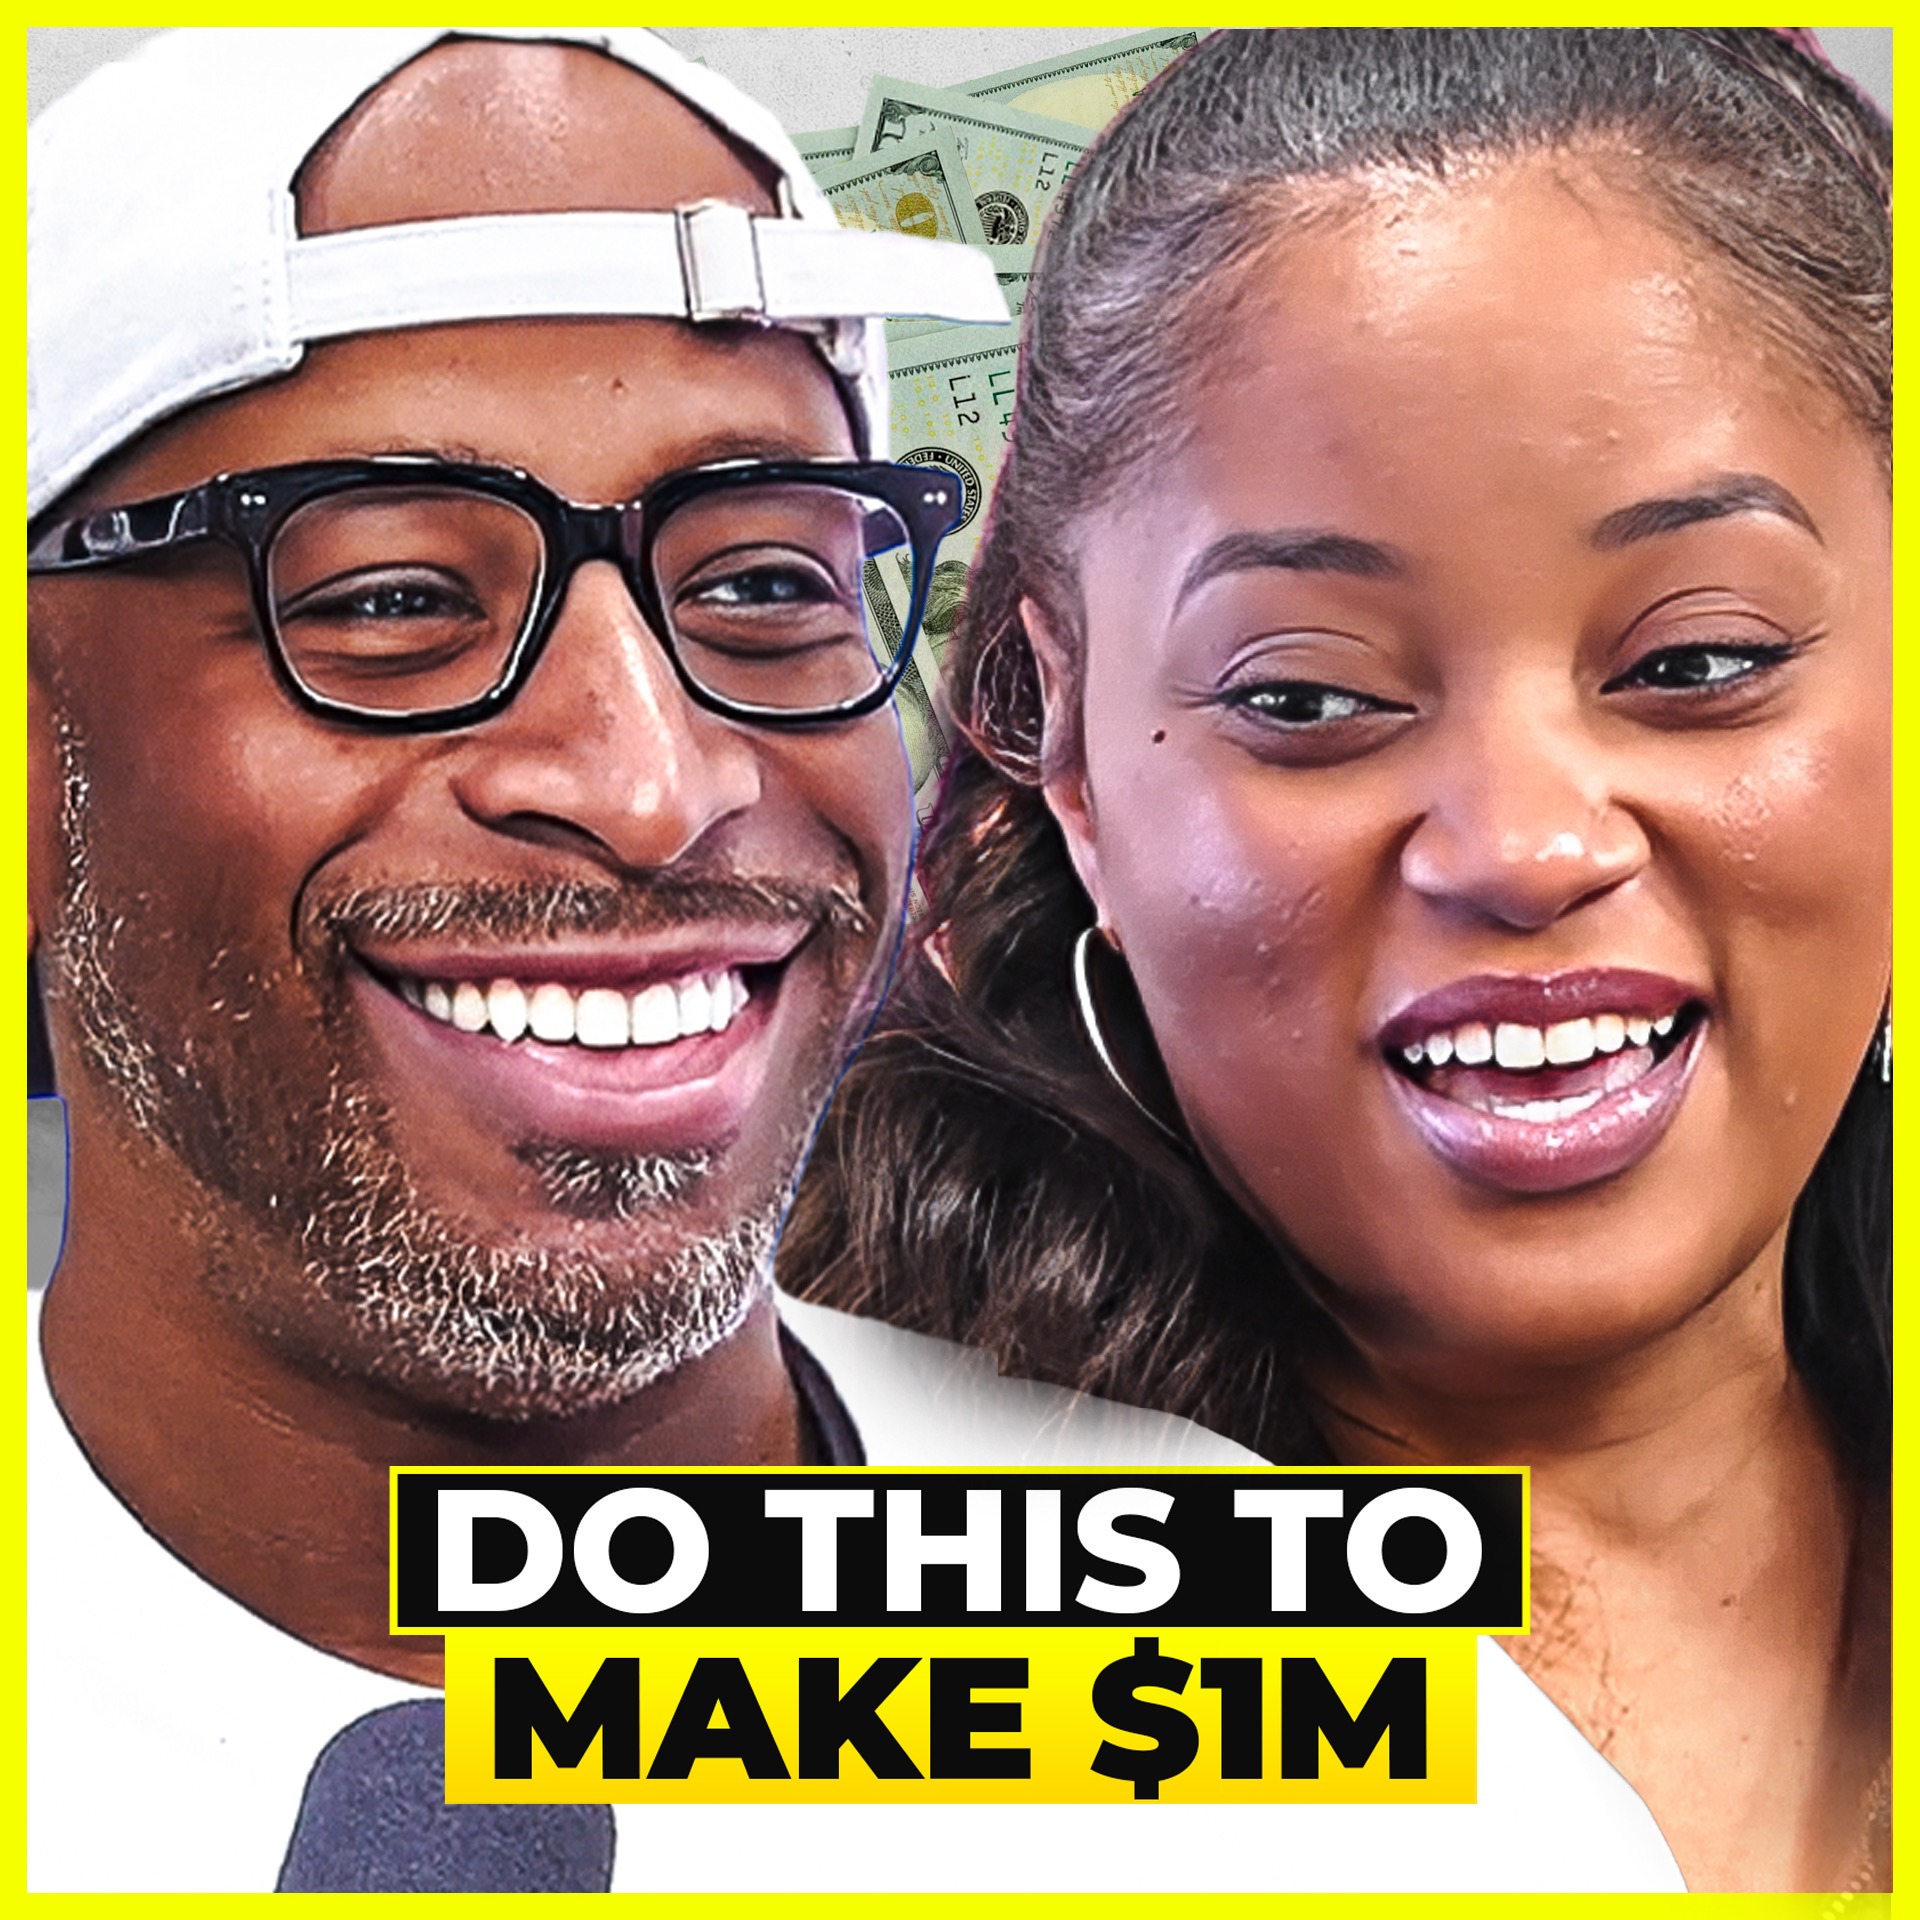 LIVE Brainstorming Session on How To Make A Million Dollars - David & Donni #424